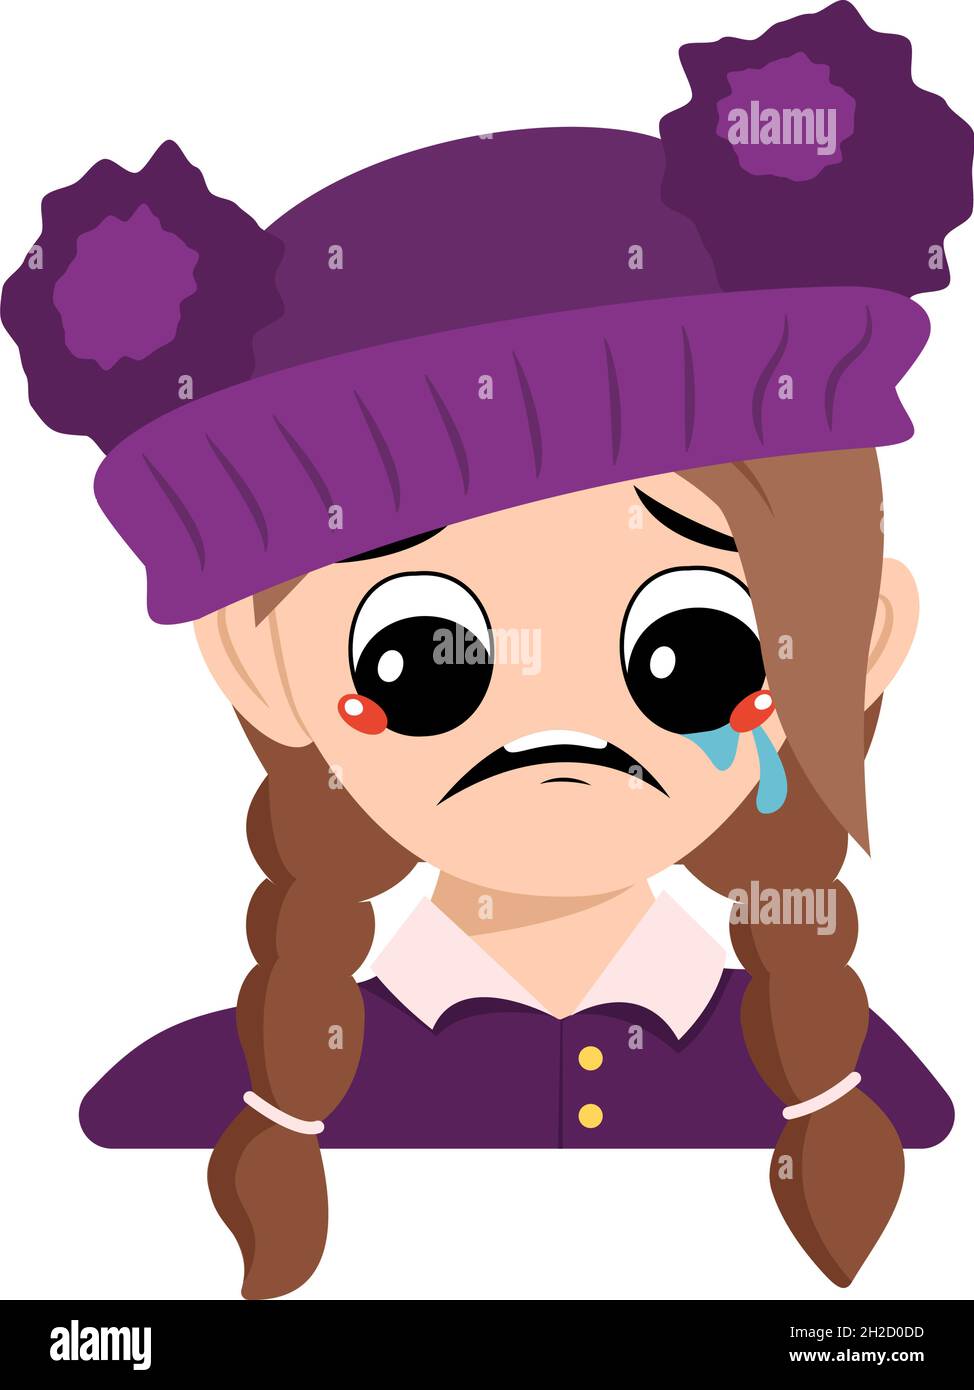 Avatar of girl with crying and tears emotion, sad face, depressive eyes in purple hat with pompom. Head of child with melancholy expression Stock Vector